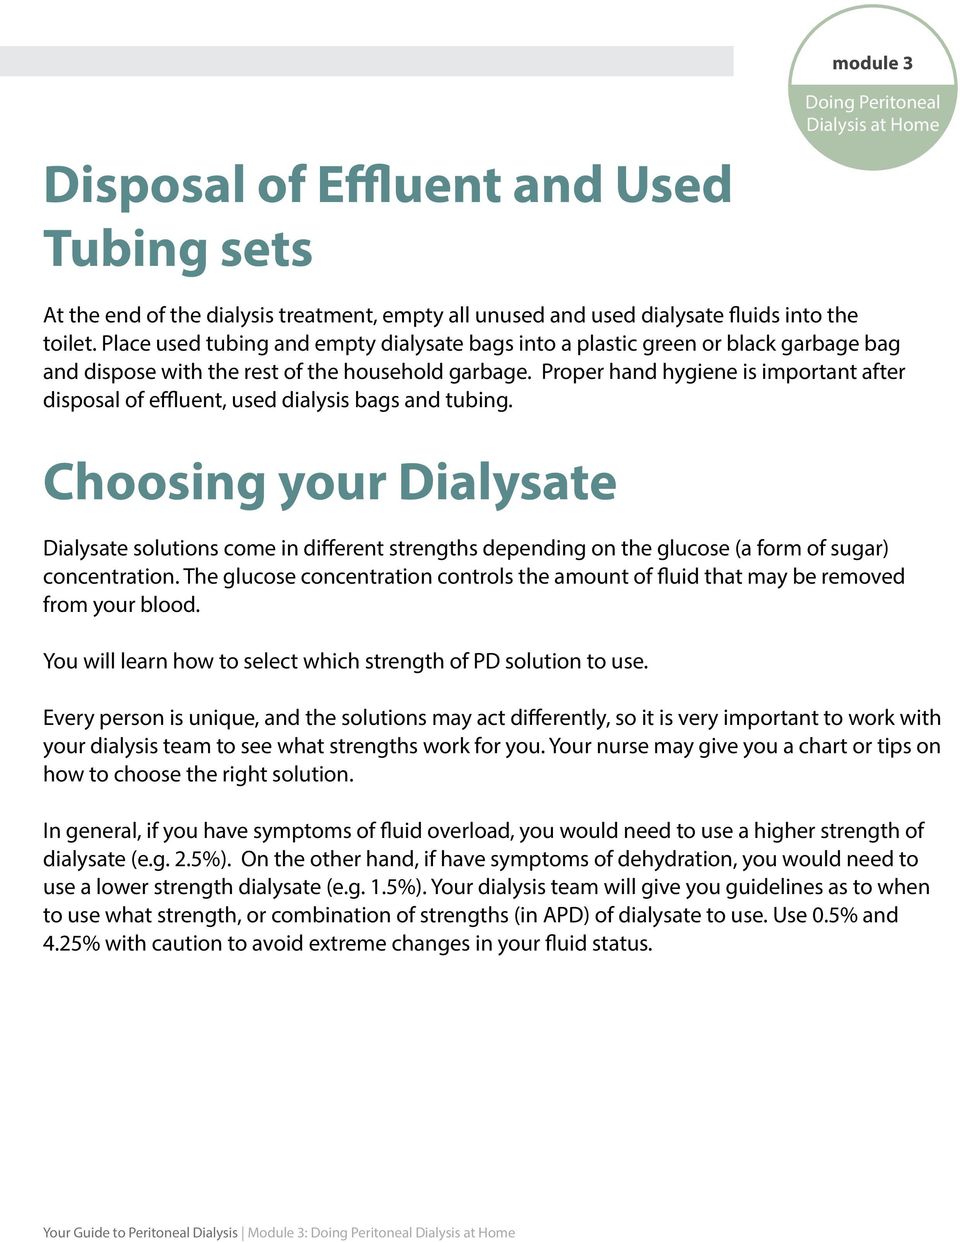 Proper hand hygiene is important after disposal of effuent, used dialysis bags and tubing.